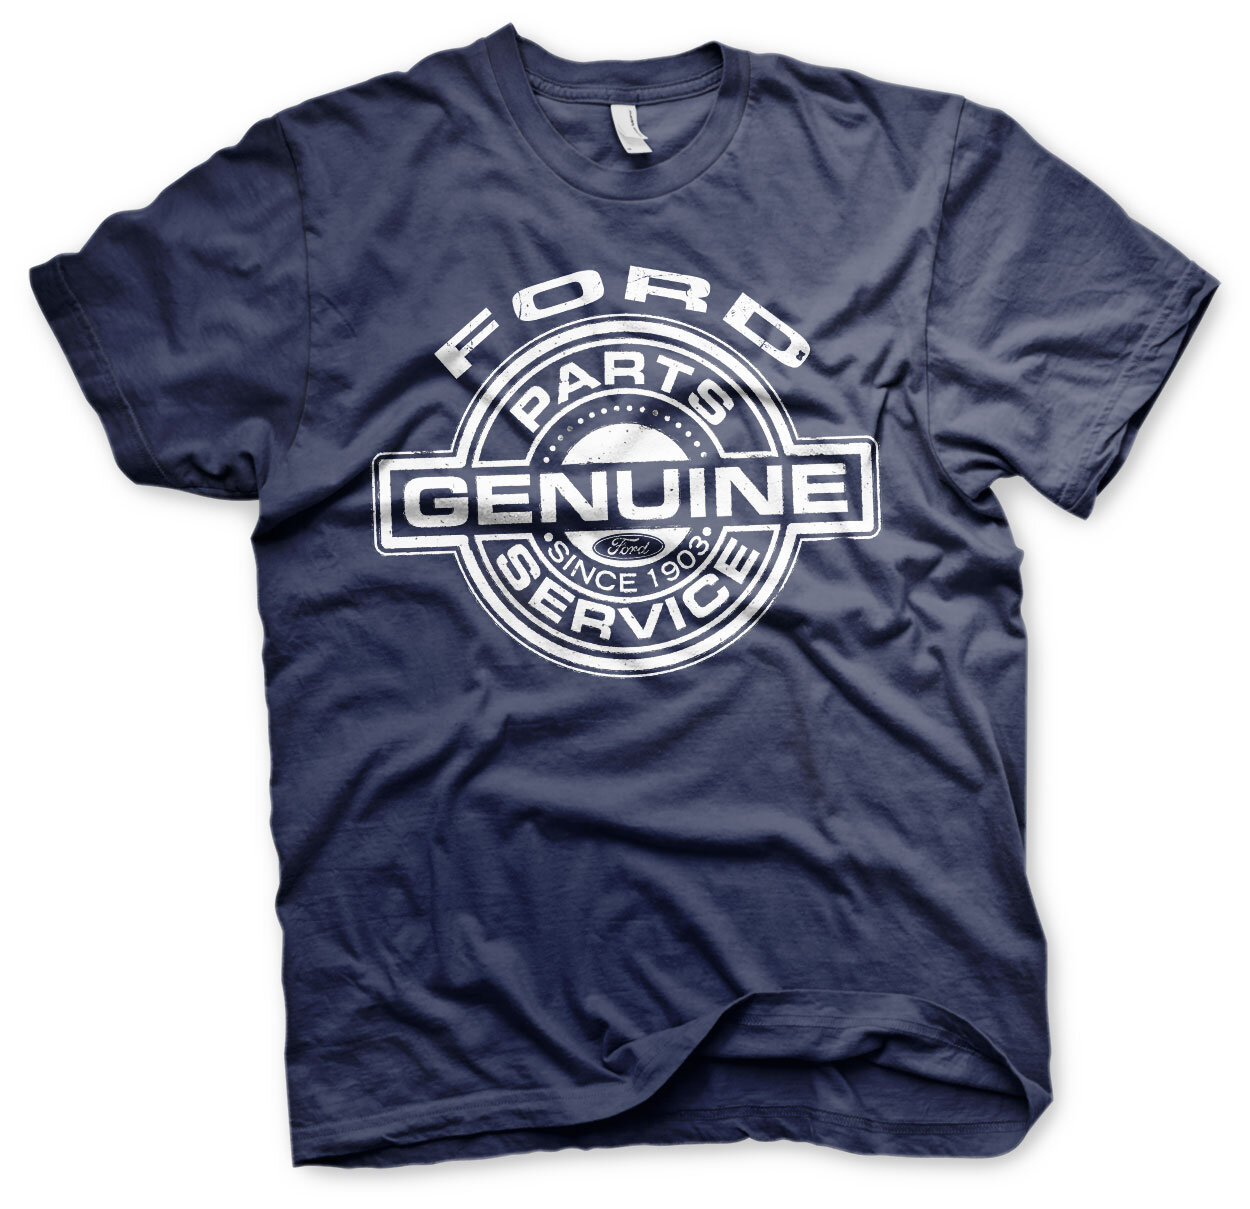 Ford - Genuine Parts And Service T-Shirt